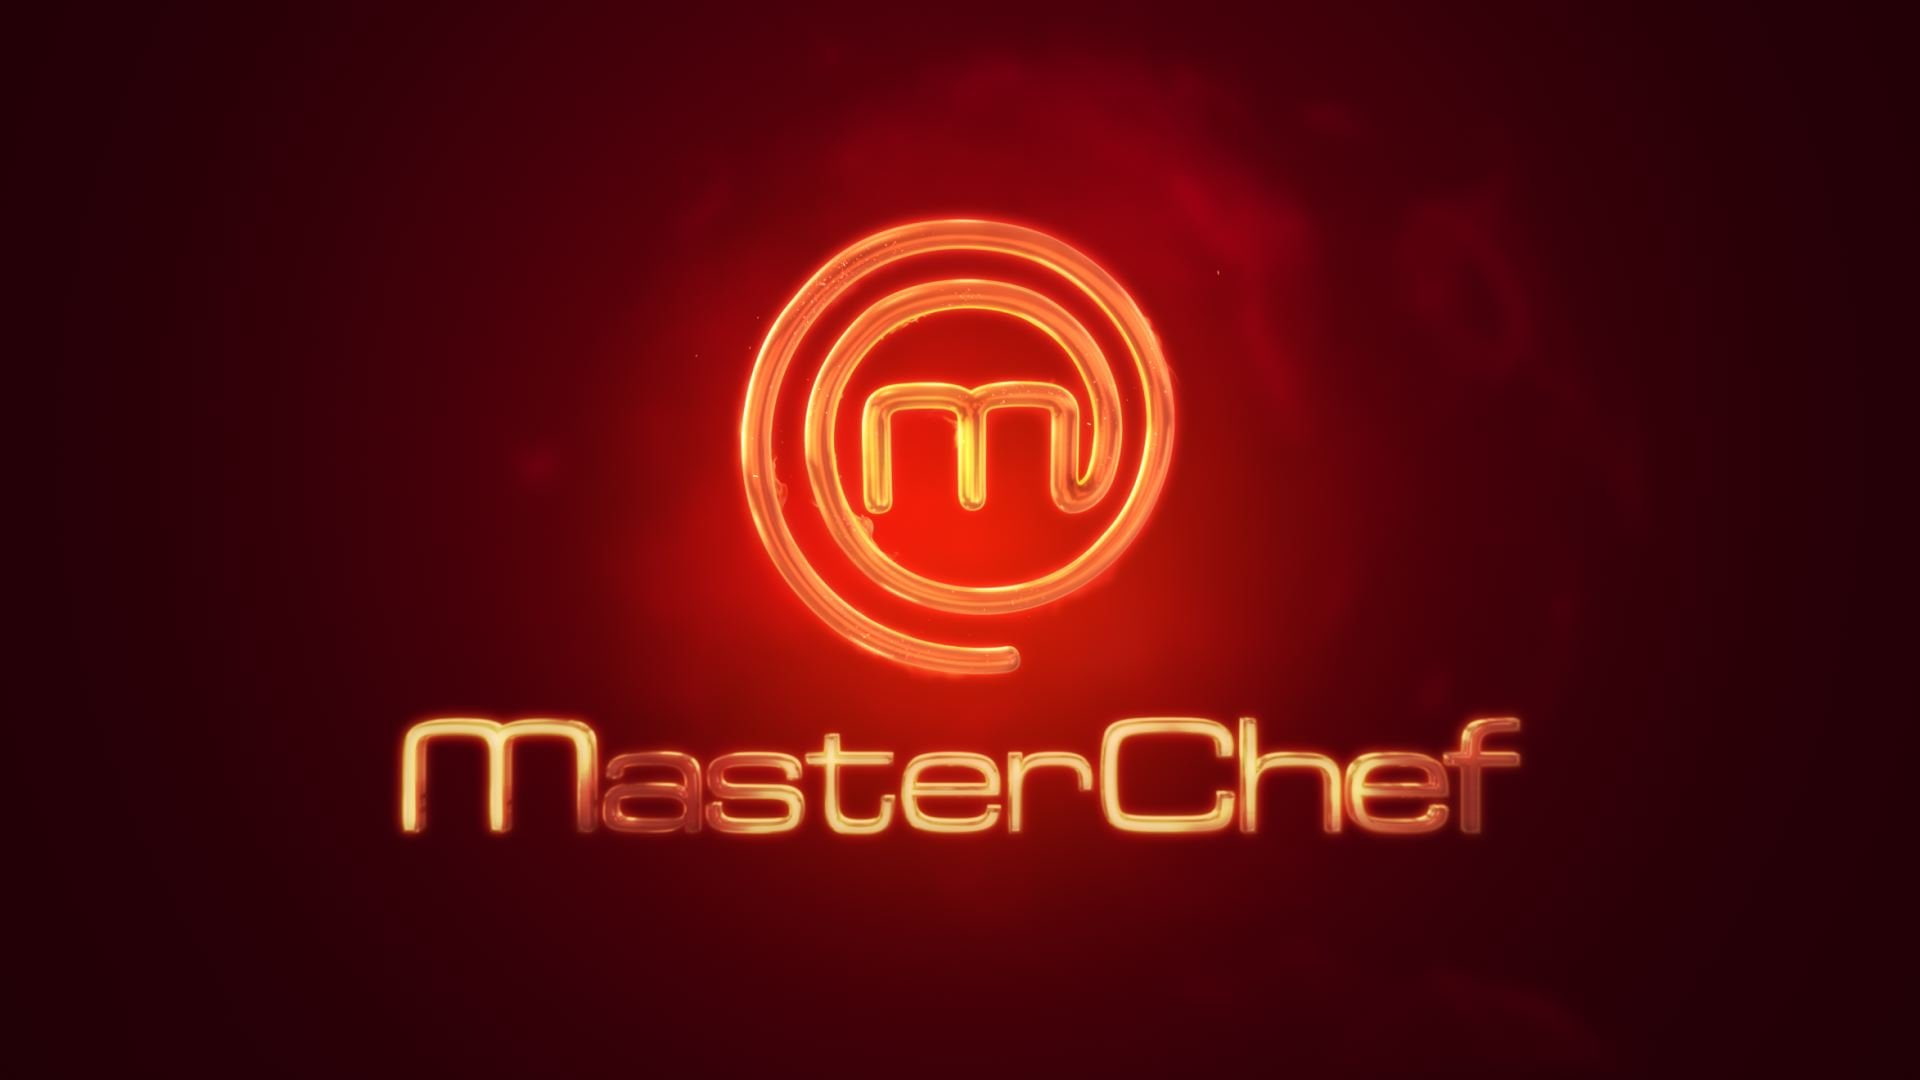 chef, cooking, food, master, masterchef, reality, series